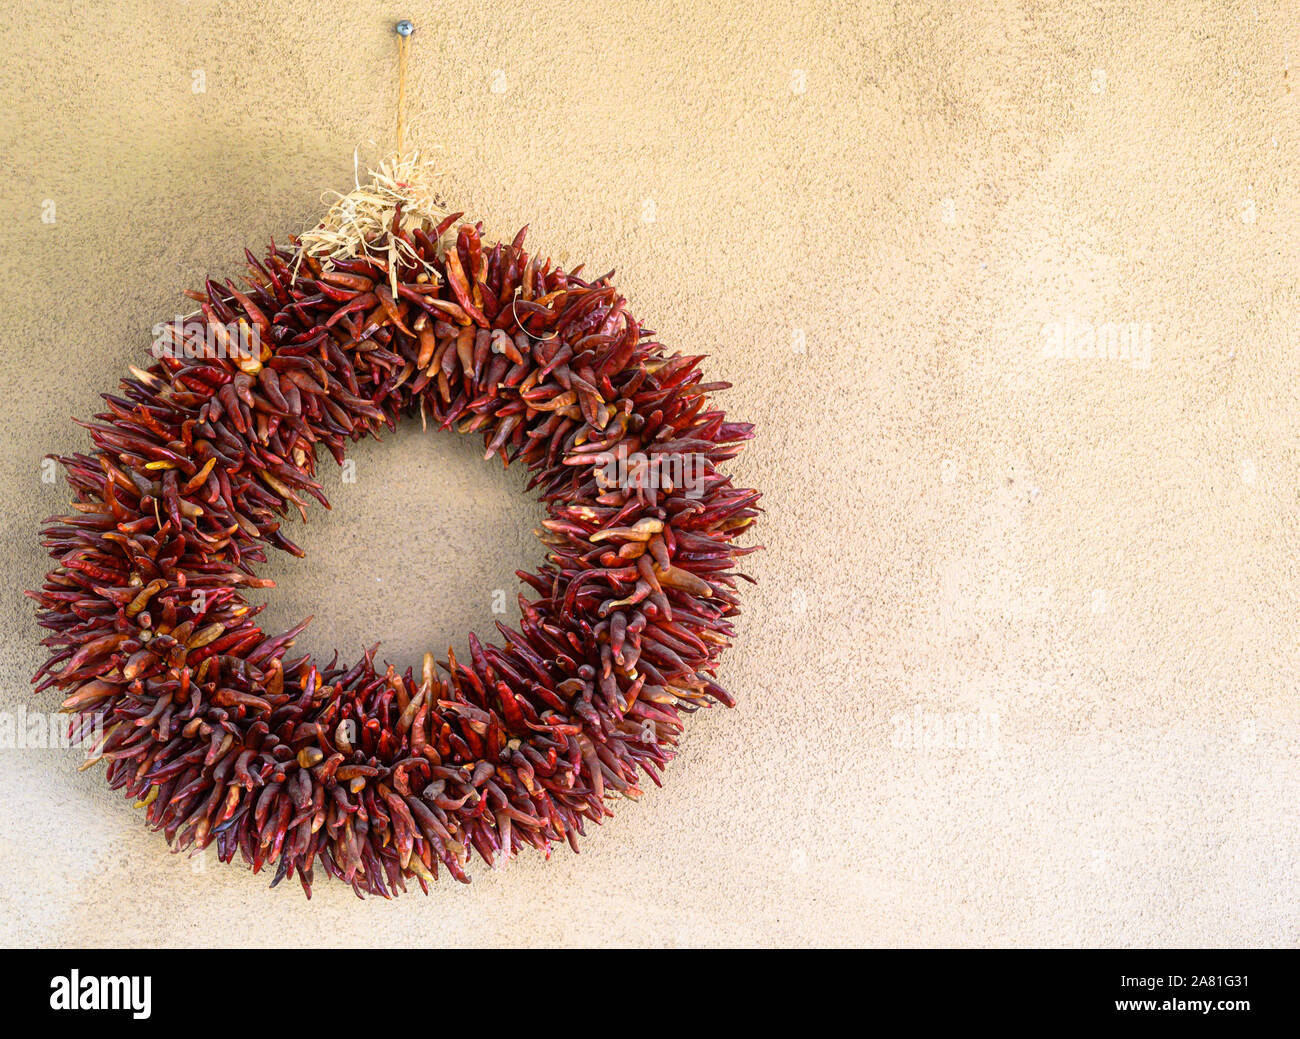 A New Mexico-style wreath made of dried red chiles Stock Photo